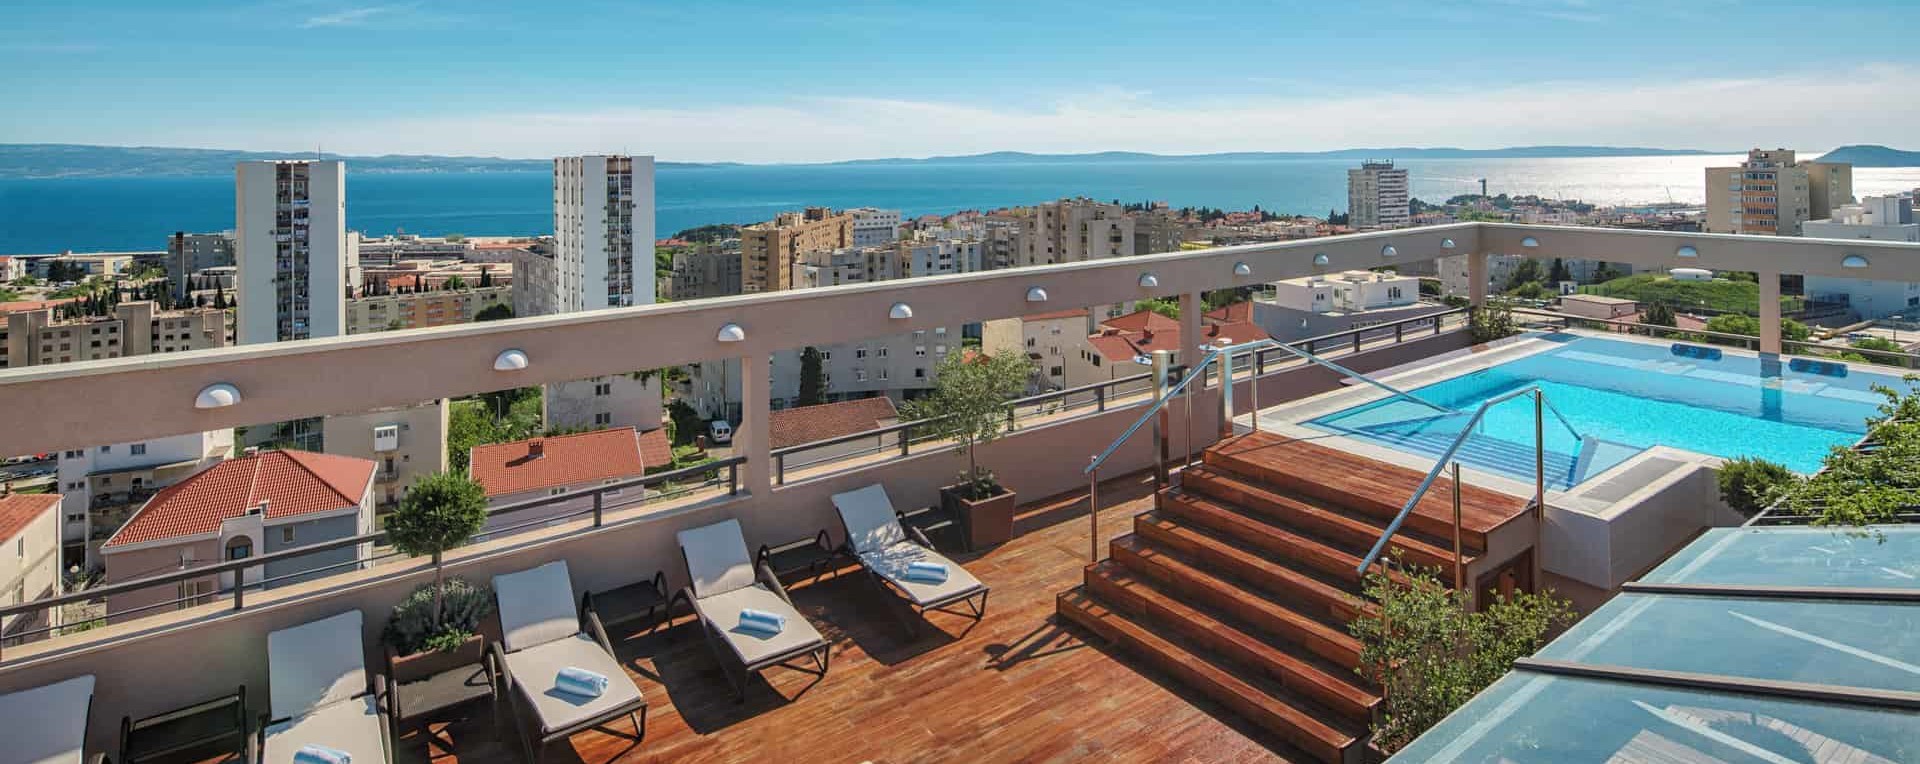 The rooftop terrace, sundeck in the Dioklecijan Hotel & Residence Split Croatia, pool and pool furniture with olive trees and plants, relaxing area, panoramic view on Split Croatia, Adriatic sea and Dalmatian islands